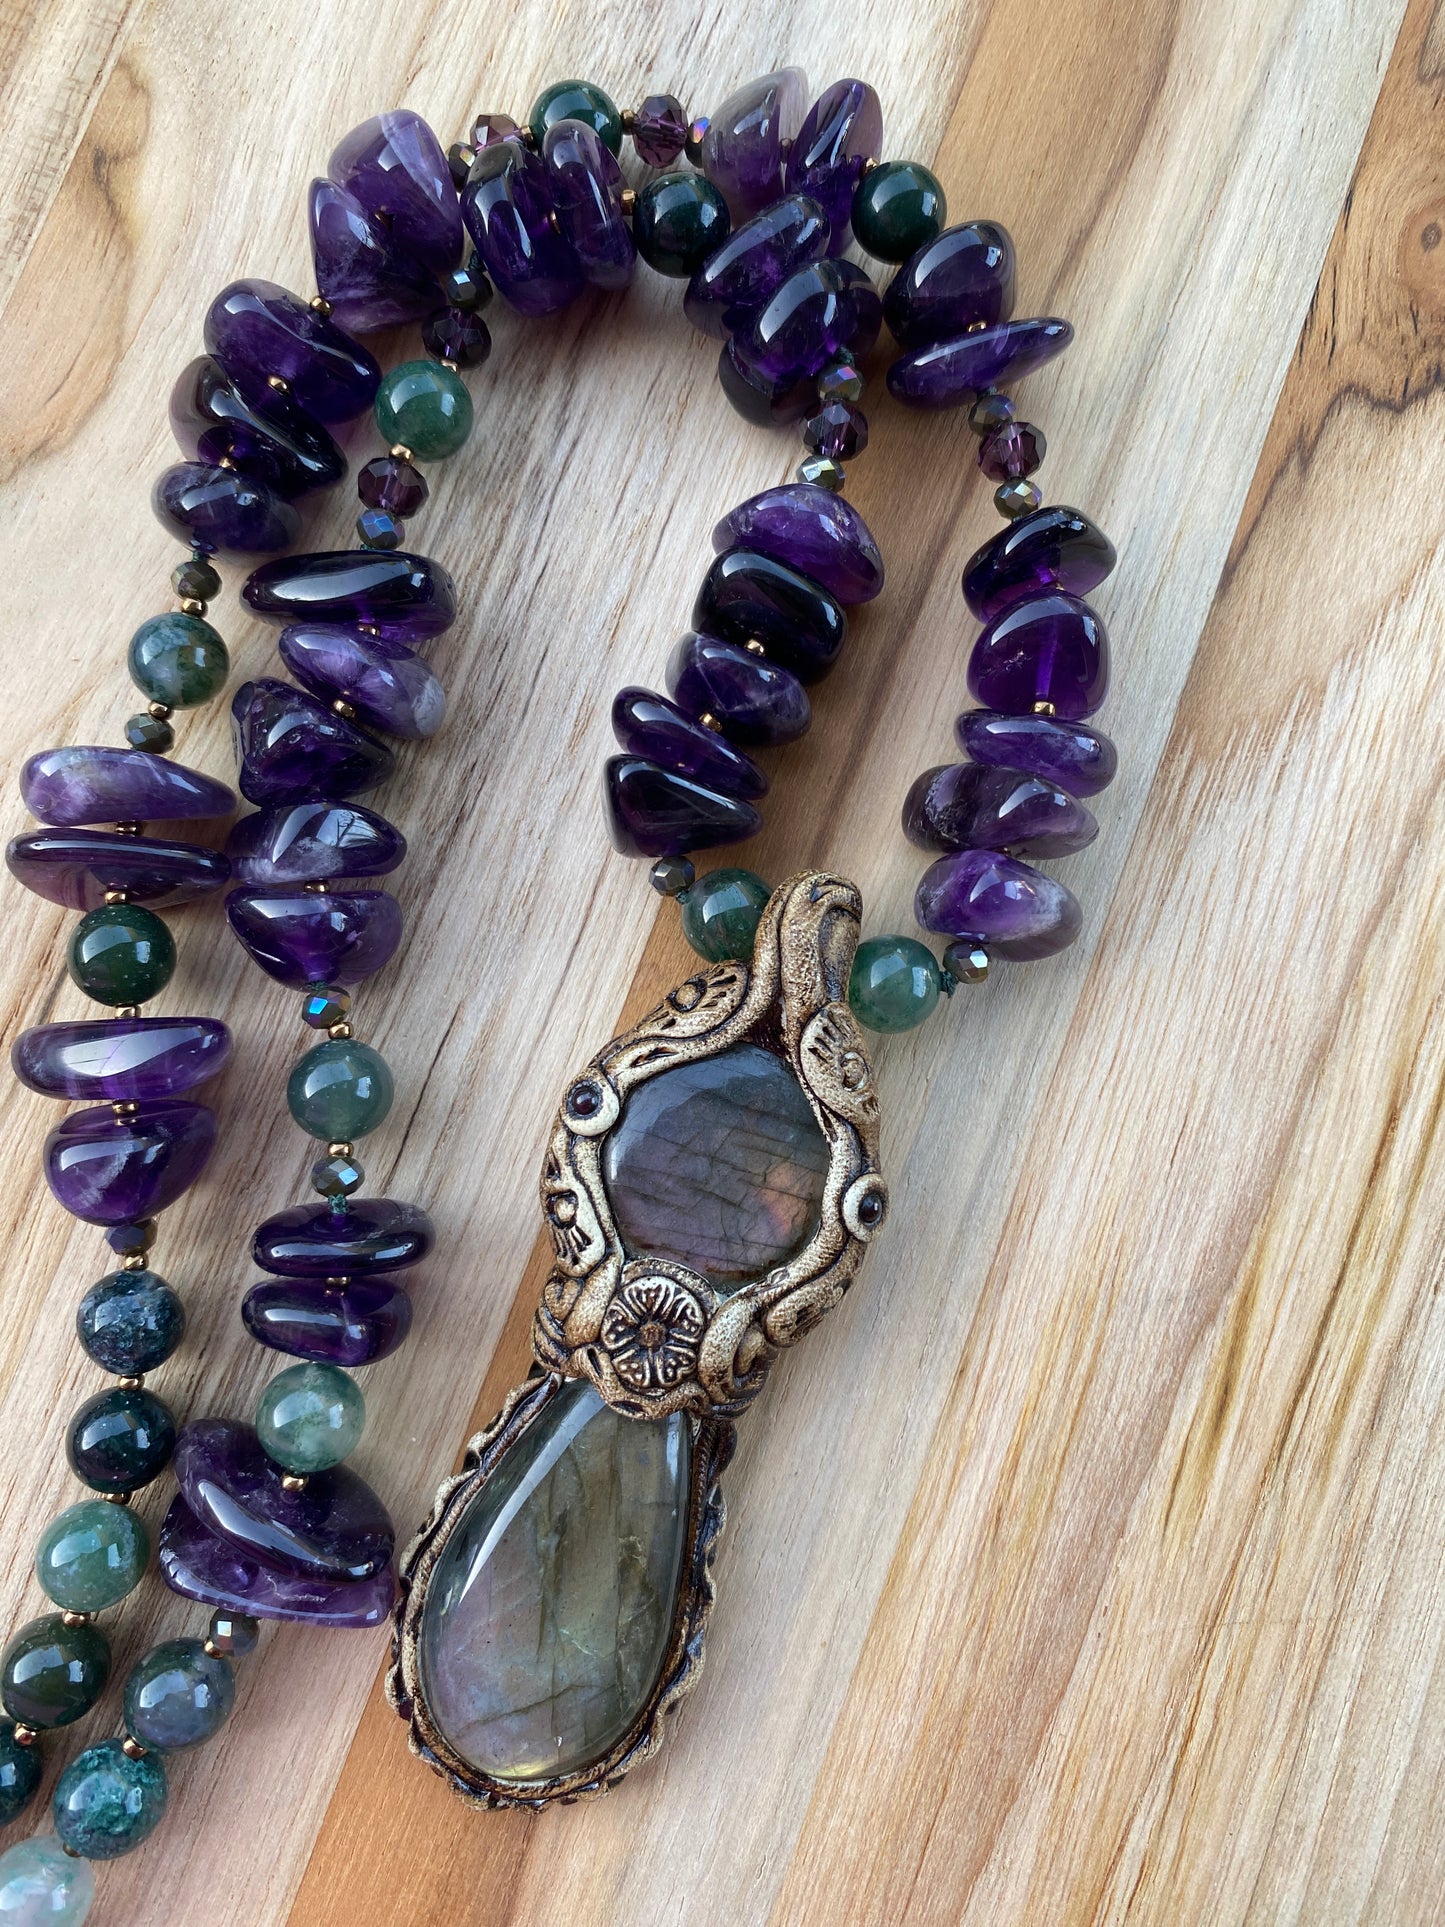 Polymer Clay Labradorite Pendant Necklace with Amethyst and Moss Agate Beads